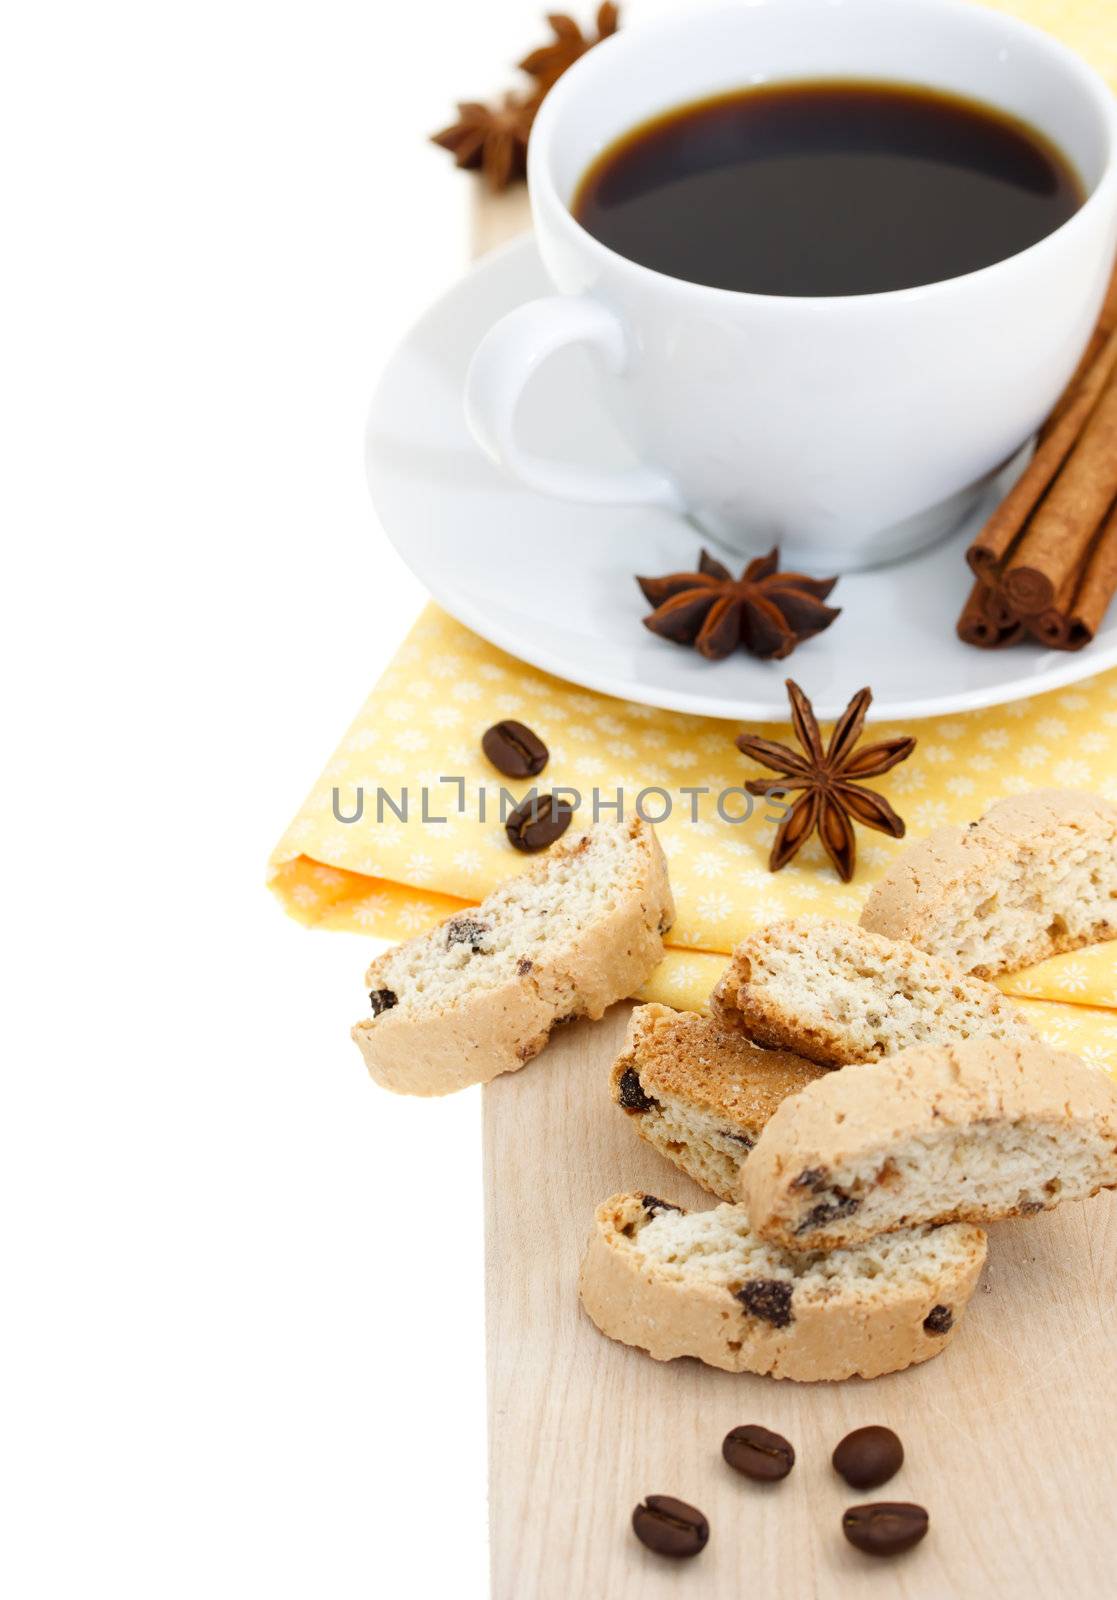 Coffee break - cup of coffee with biscuits with spices